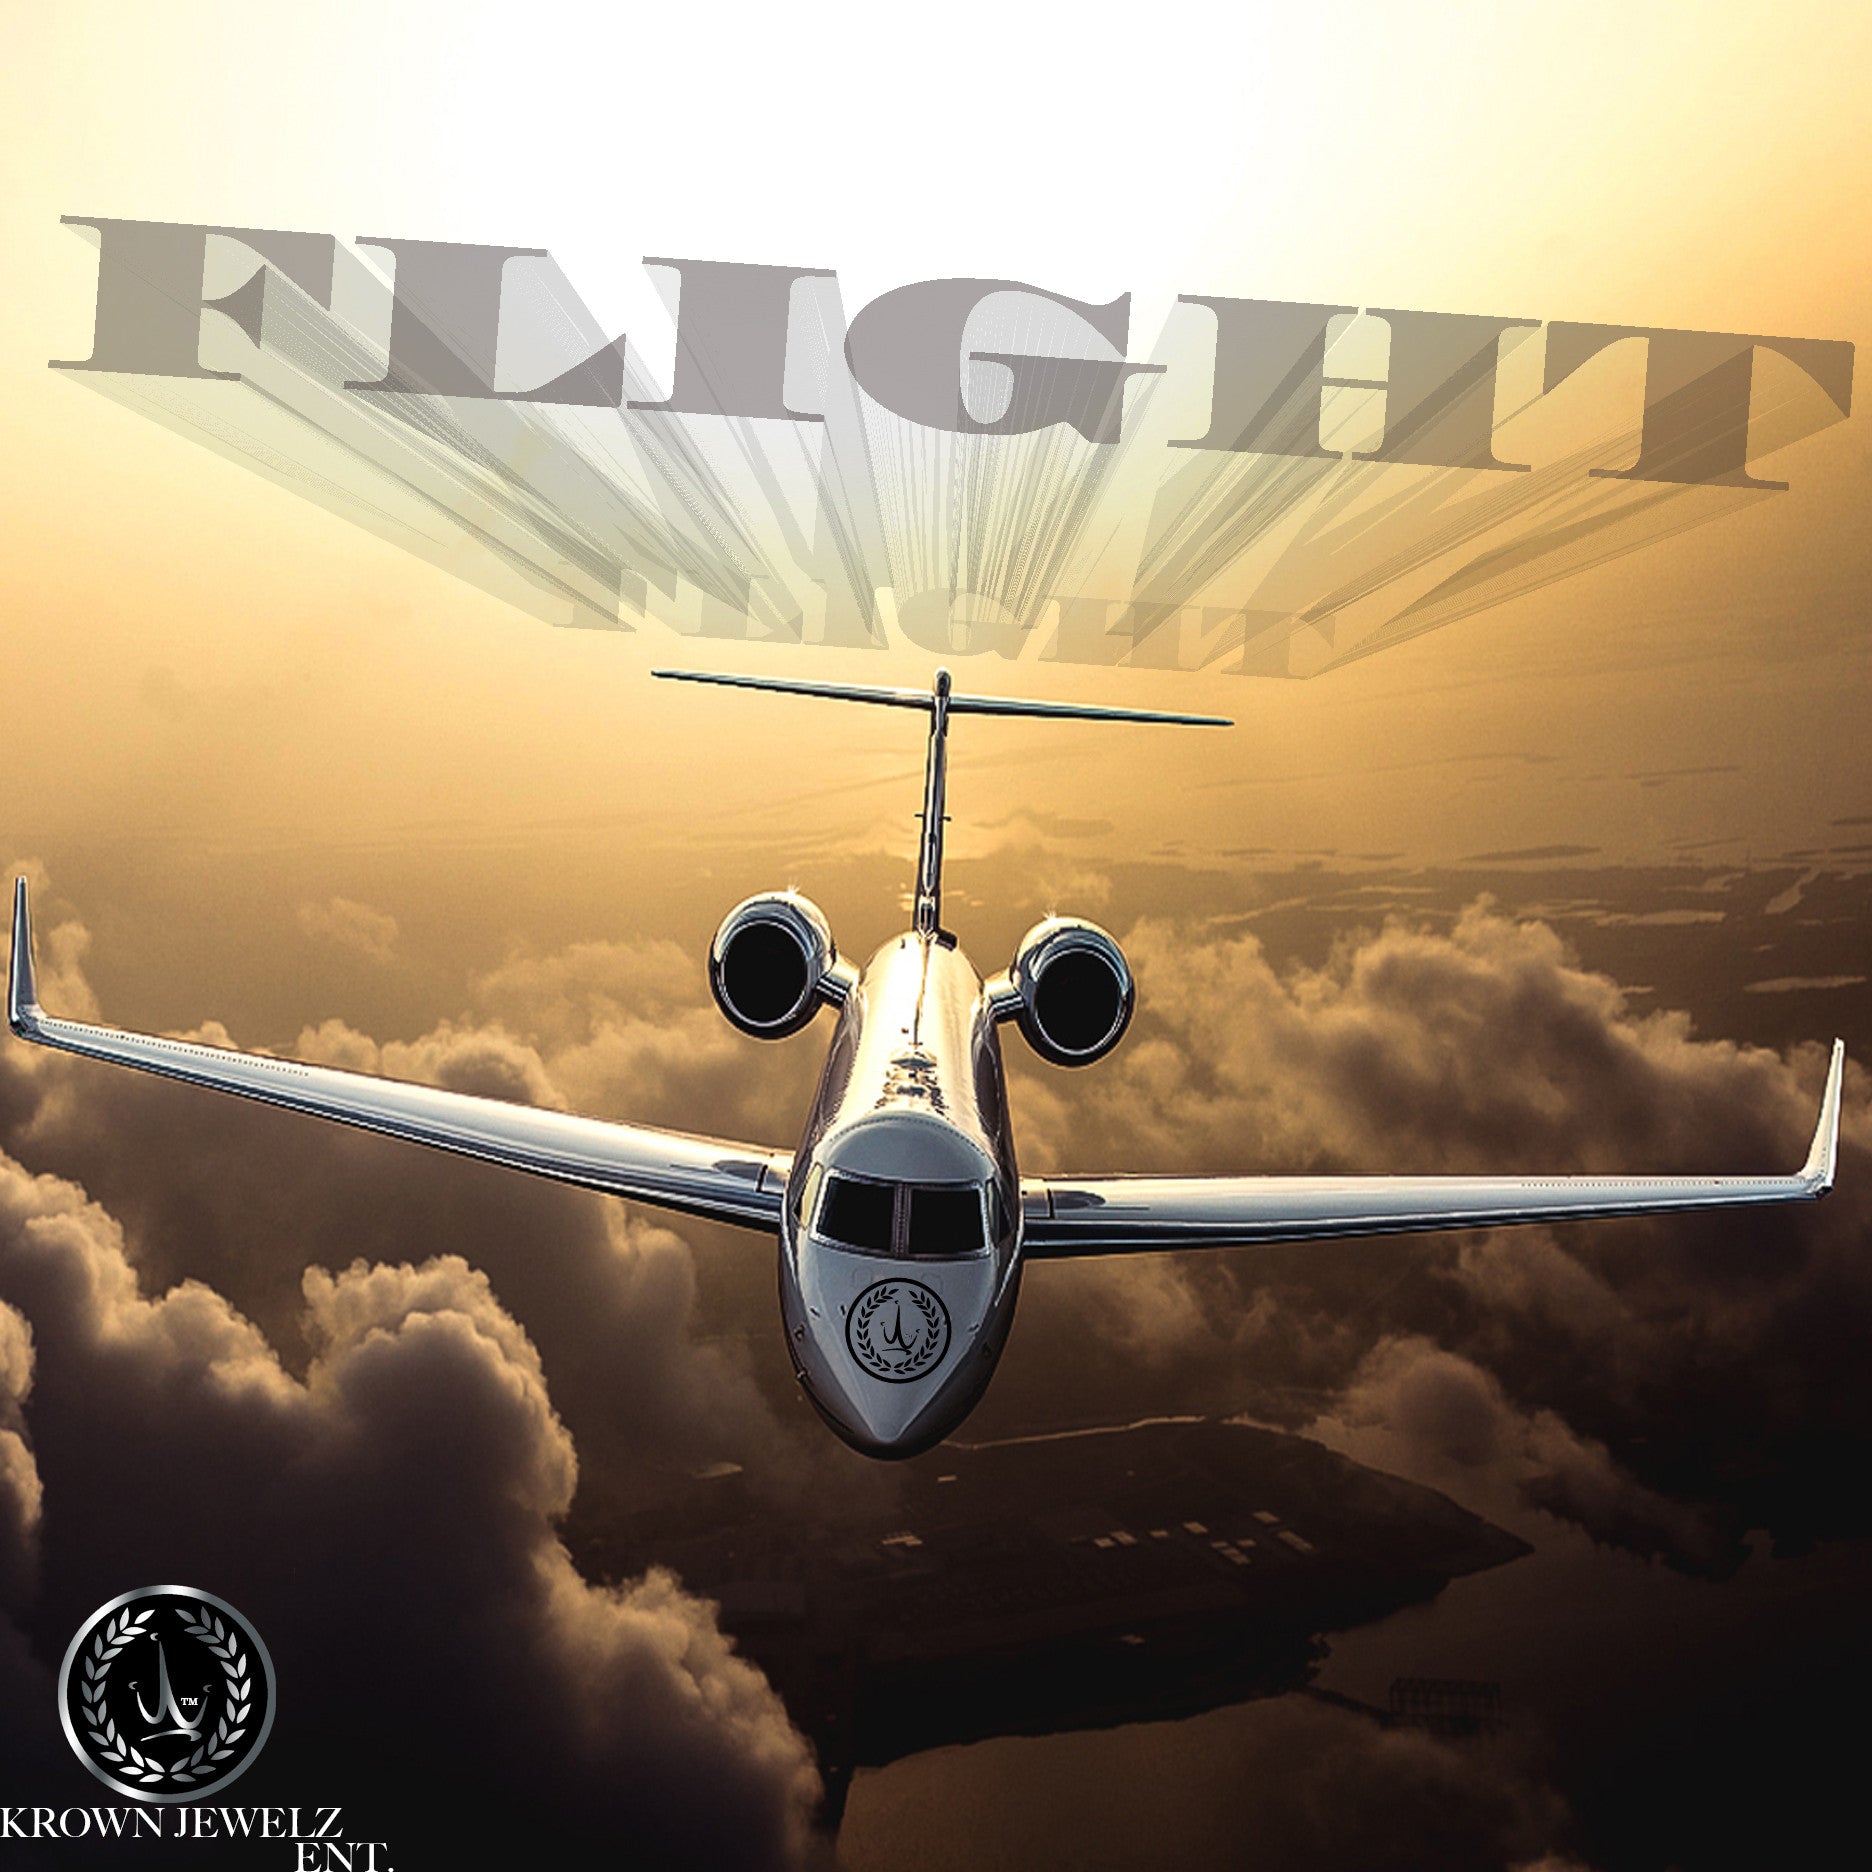 Flight by: GS ( Prod. by: Platinum Sellers , Mix/Mastered by: R & J Studios )